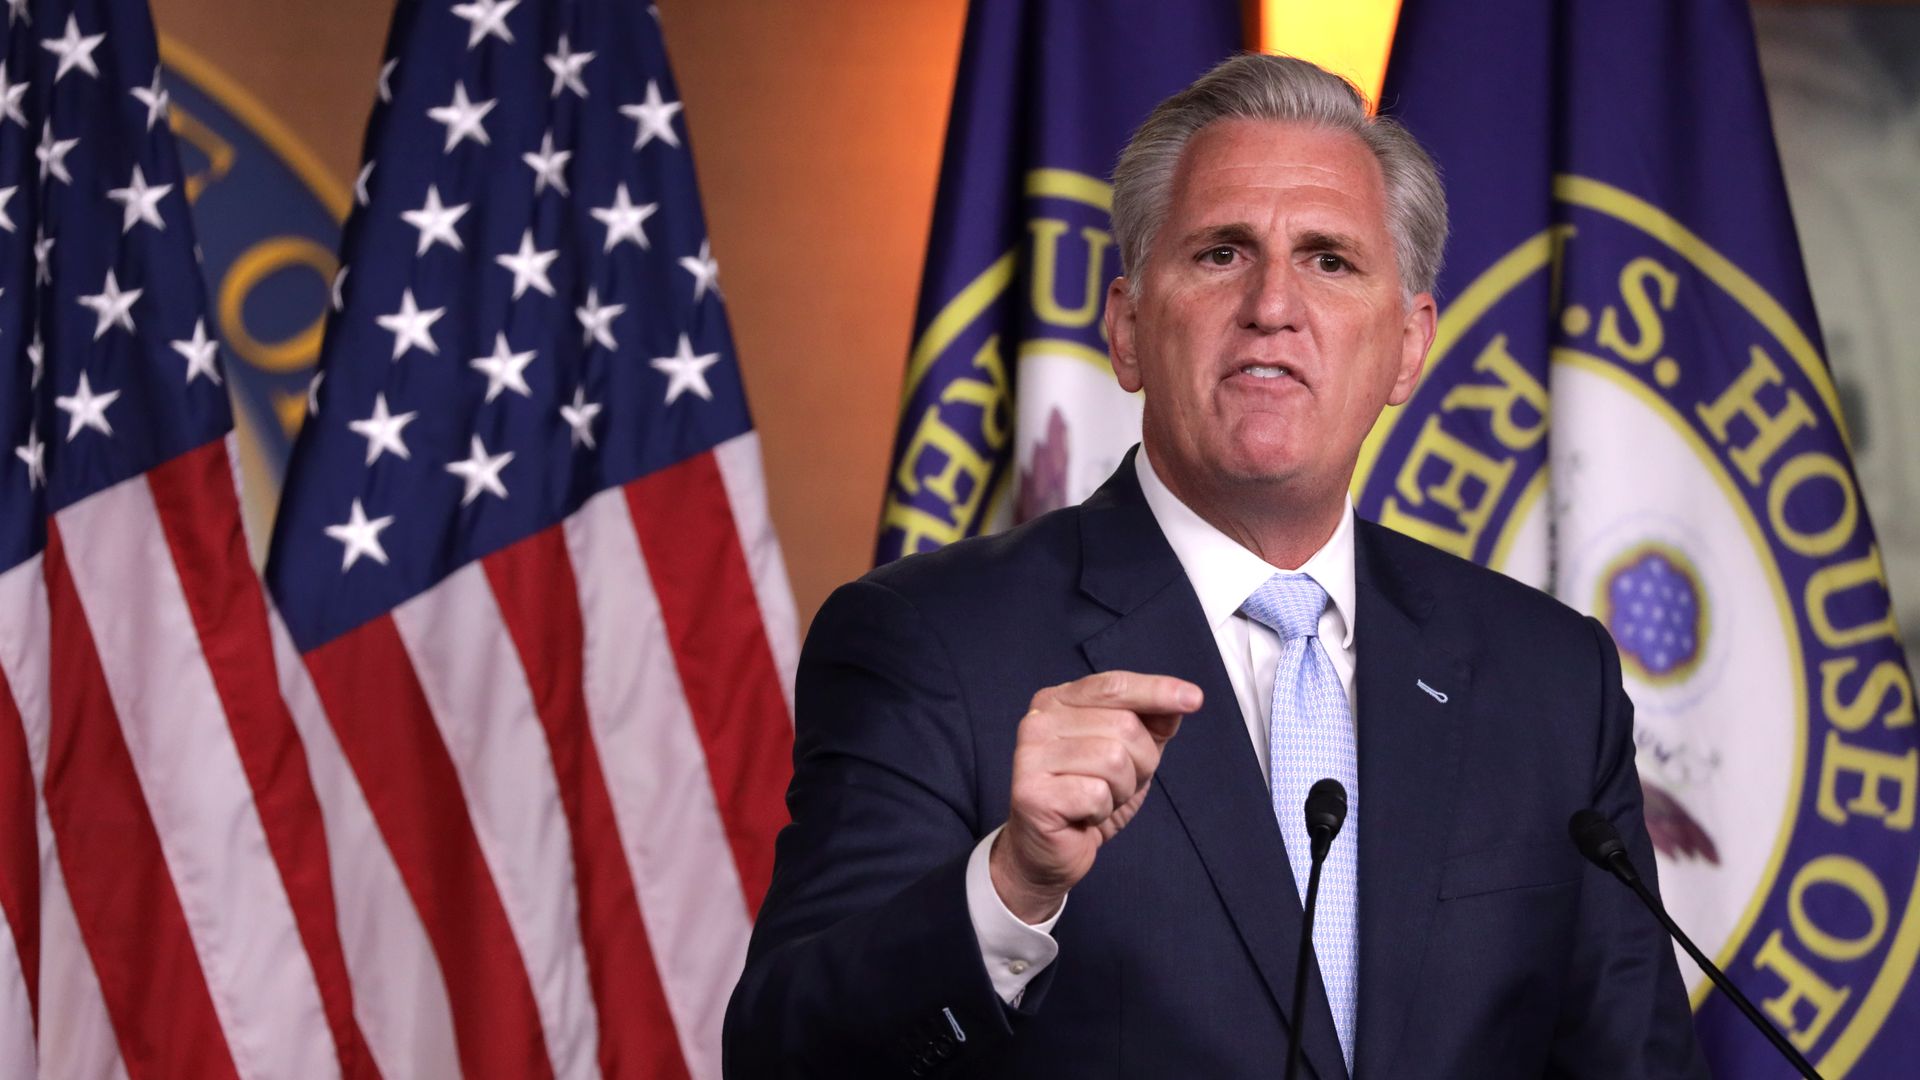 House GOP Leader Kevin McCarthy points a finger and speaks emphatically.